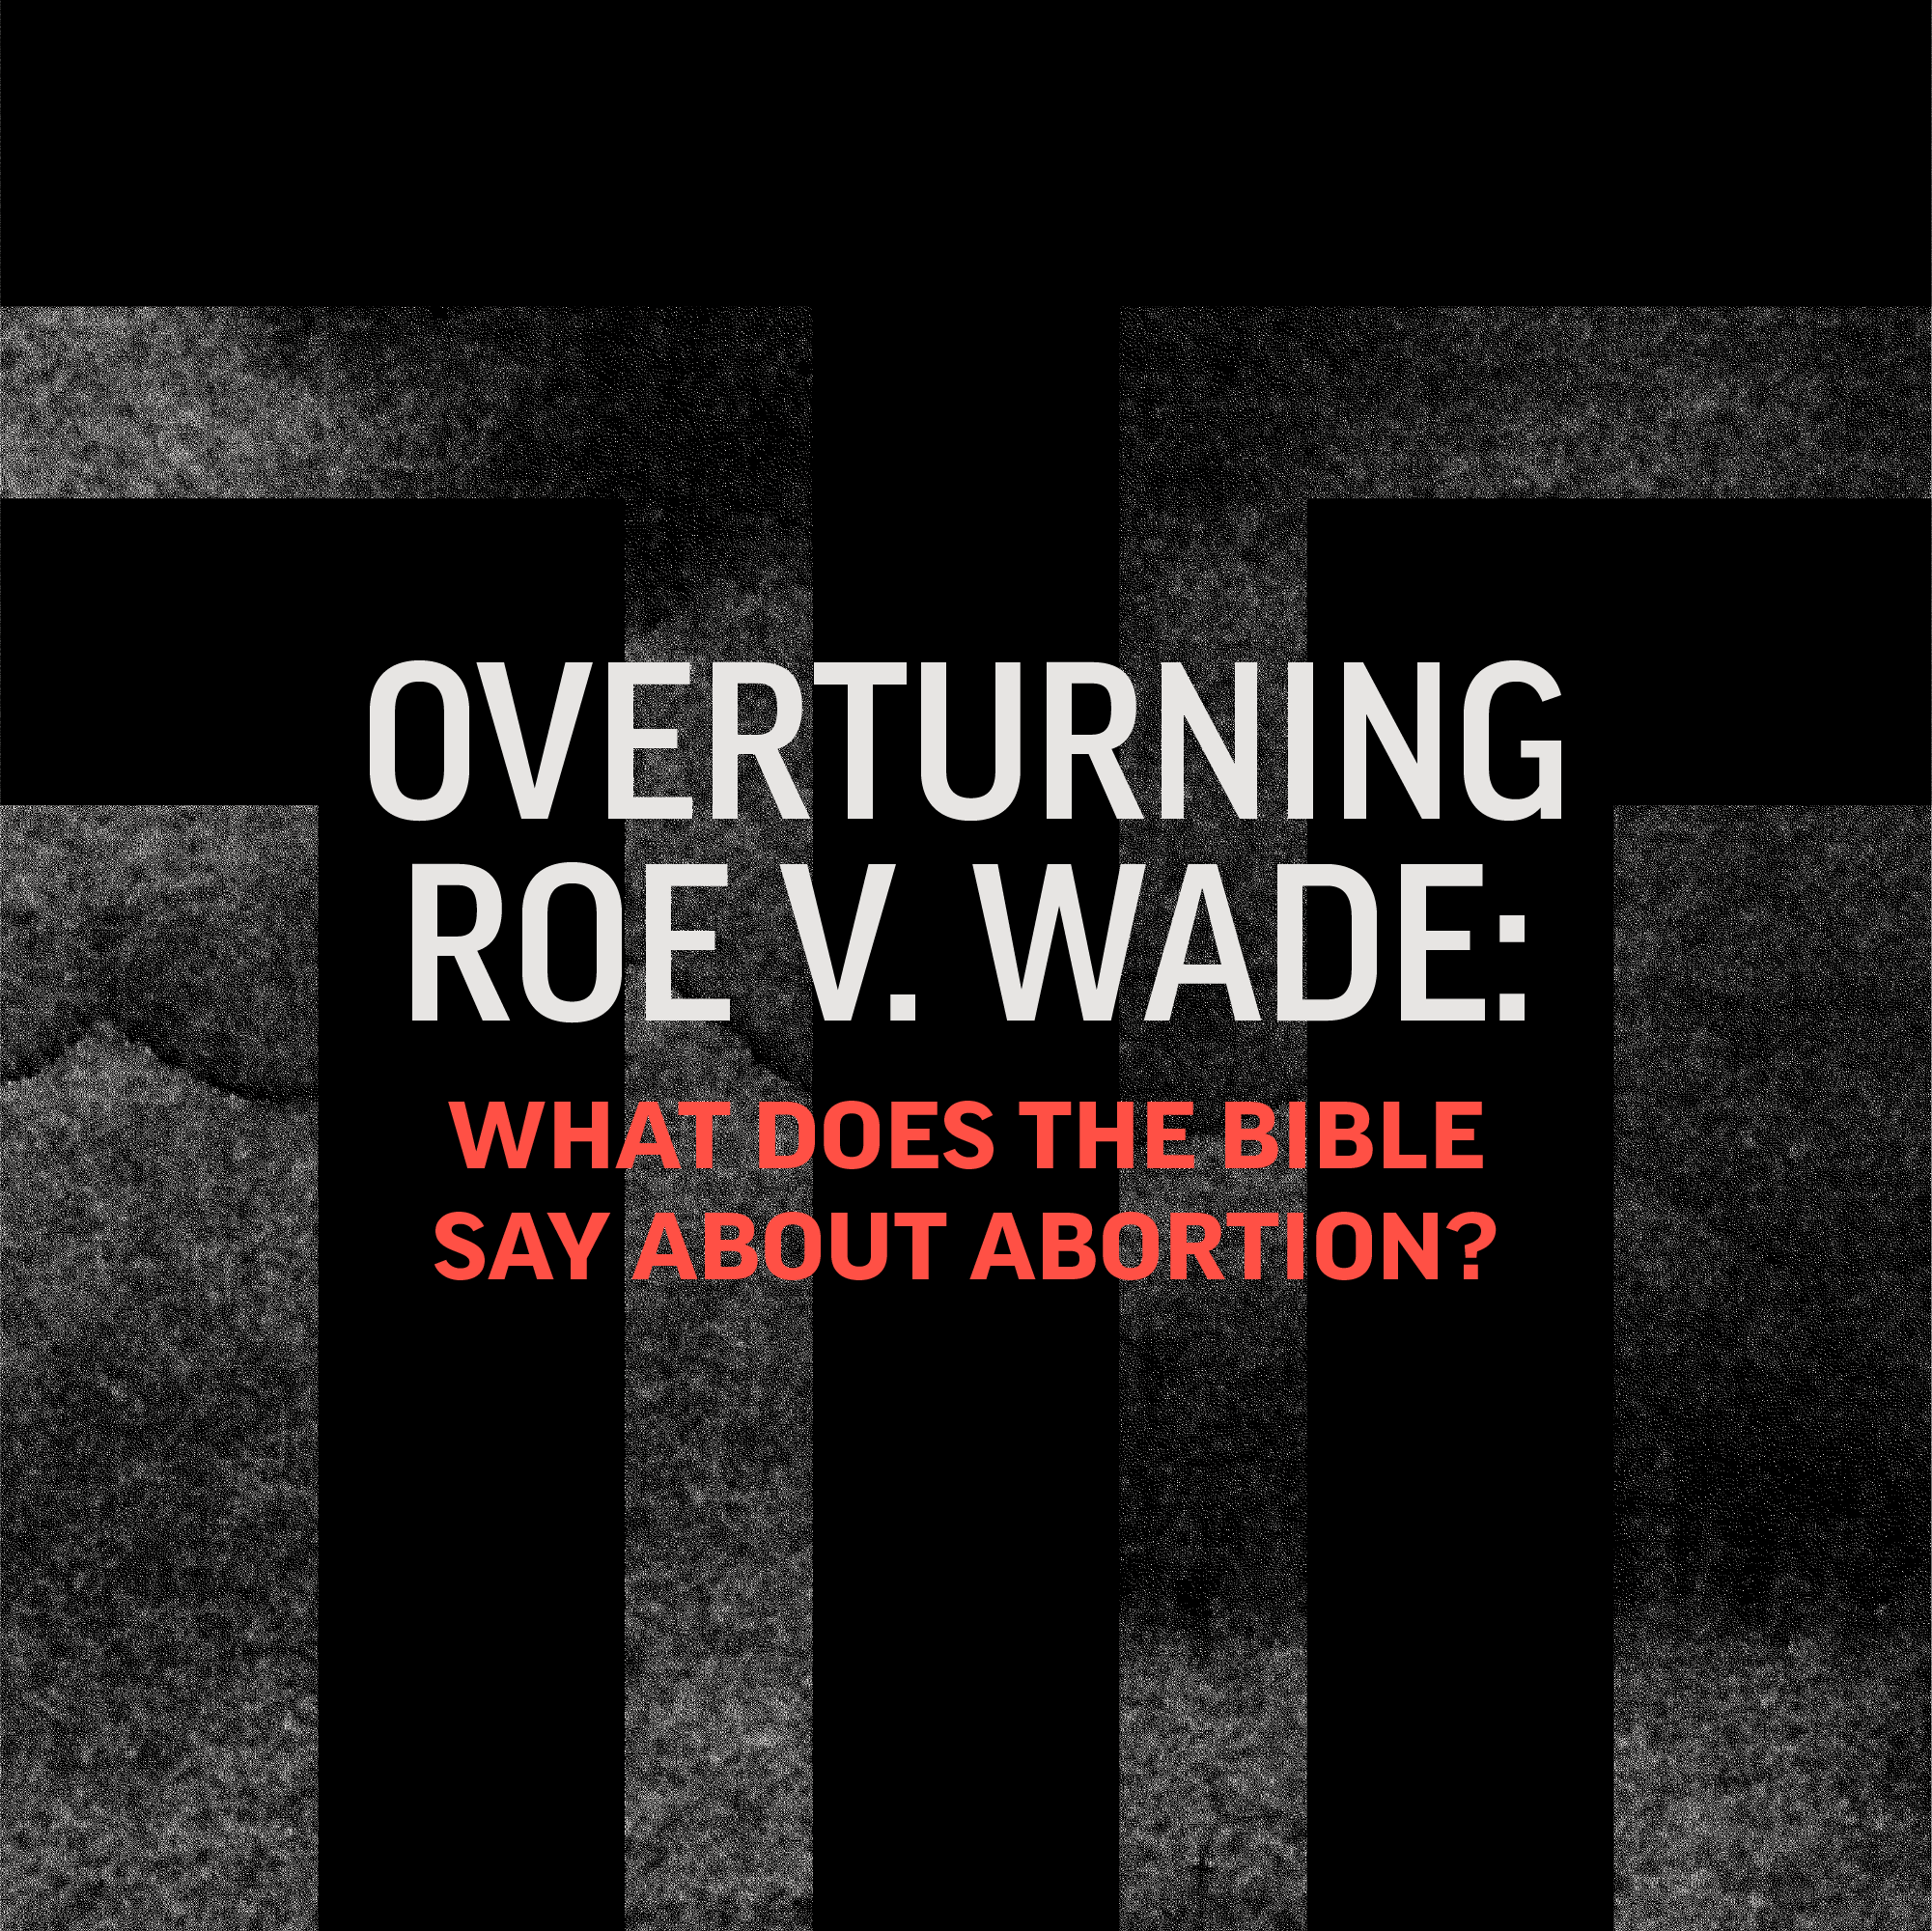 Overturning Roe v. Wade: What Does the Bible Say About Abortion?